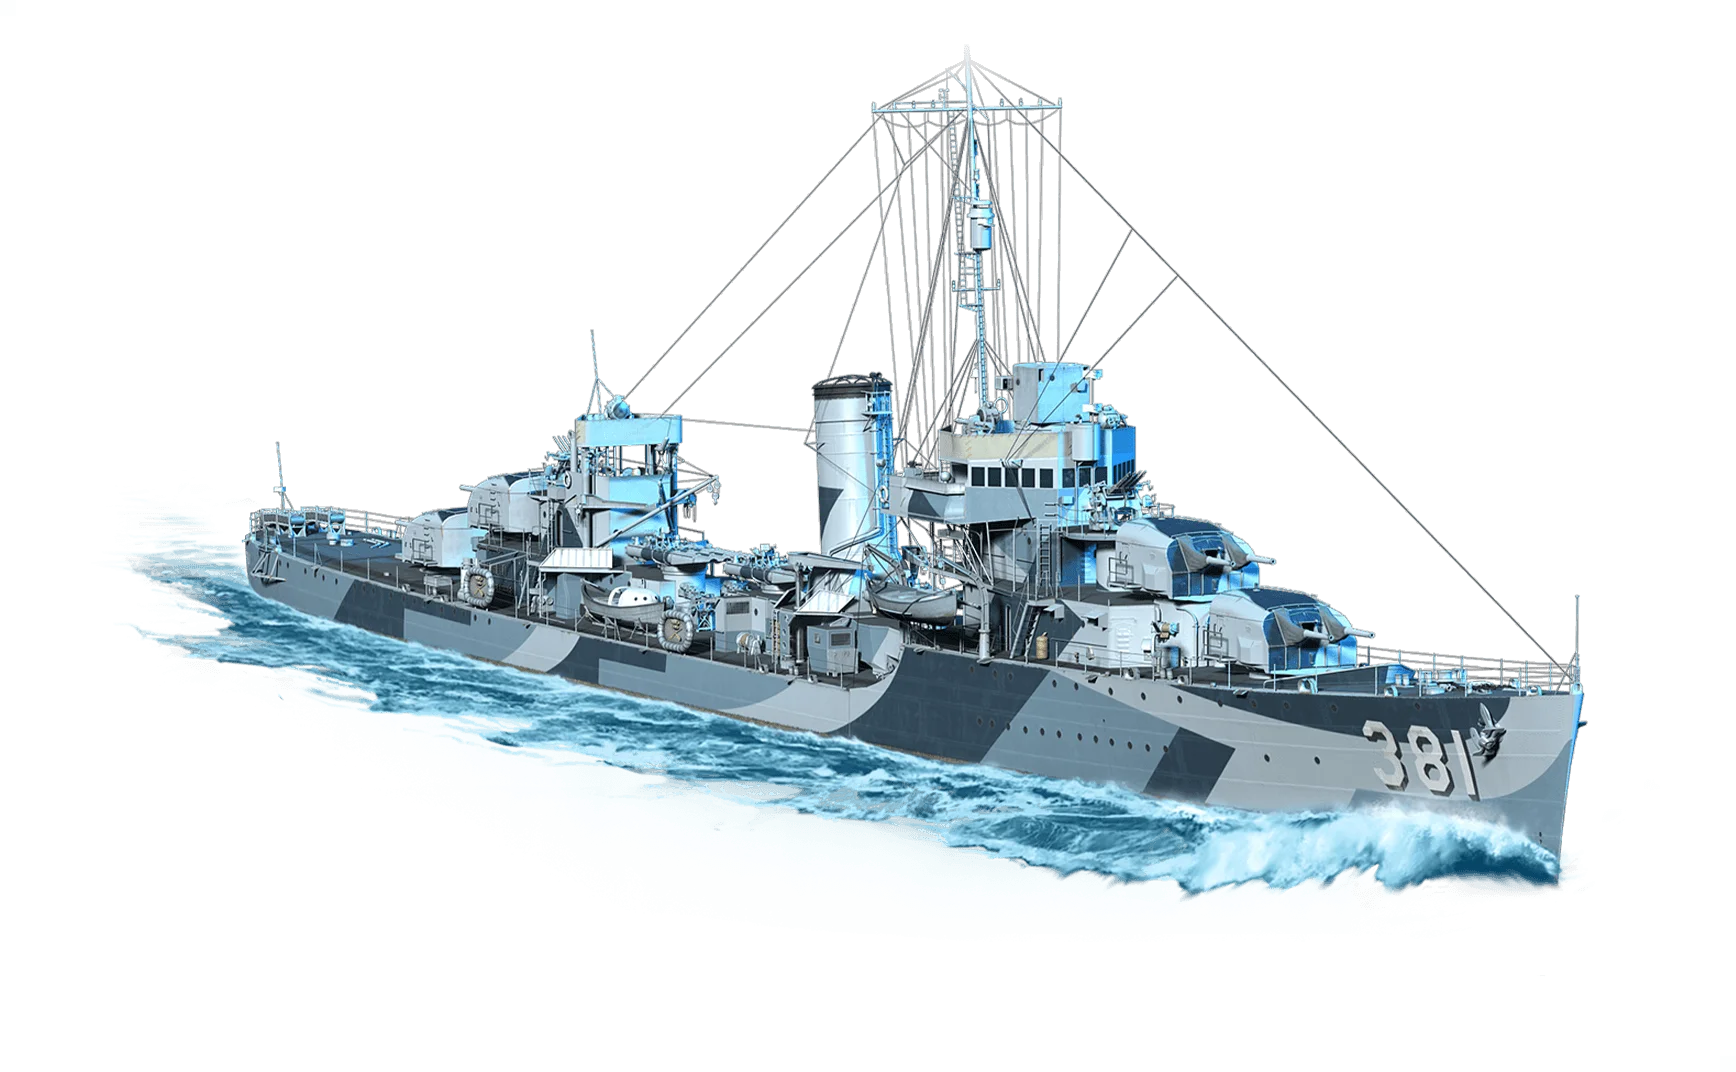 Somers CE from World Of Warships: Legends